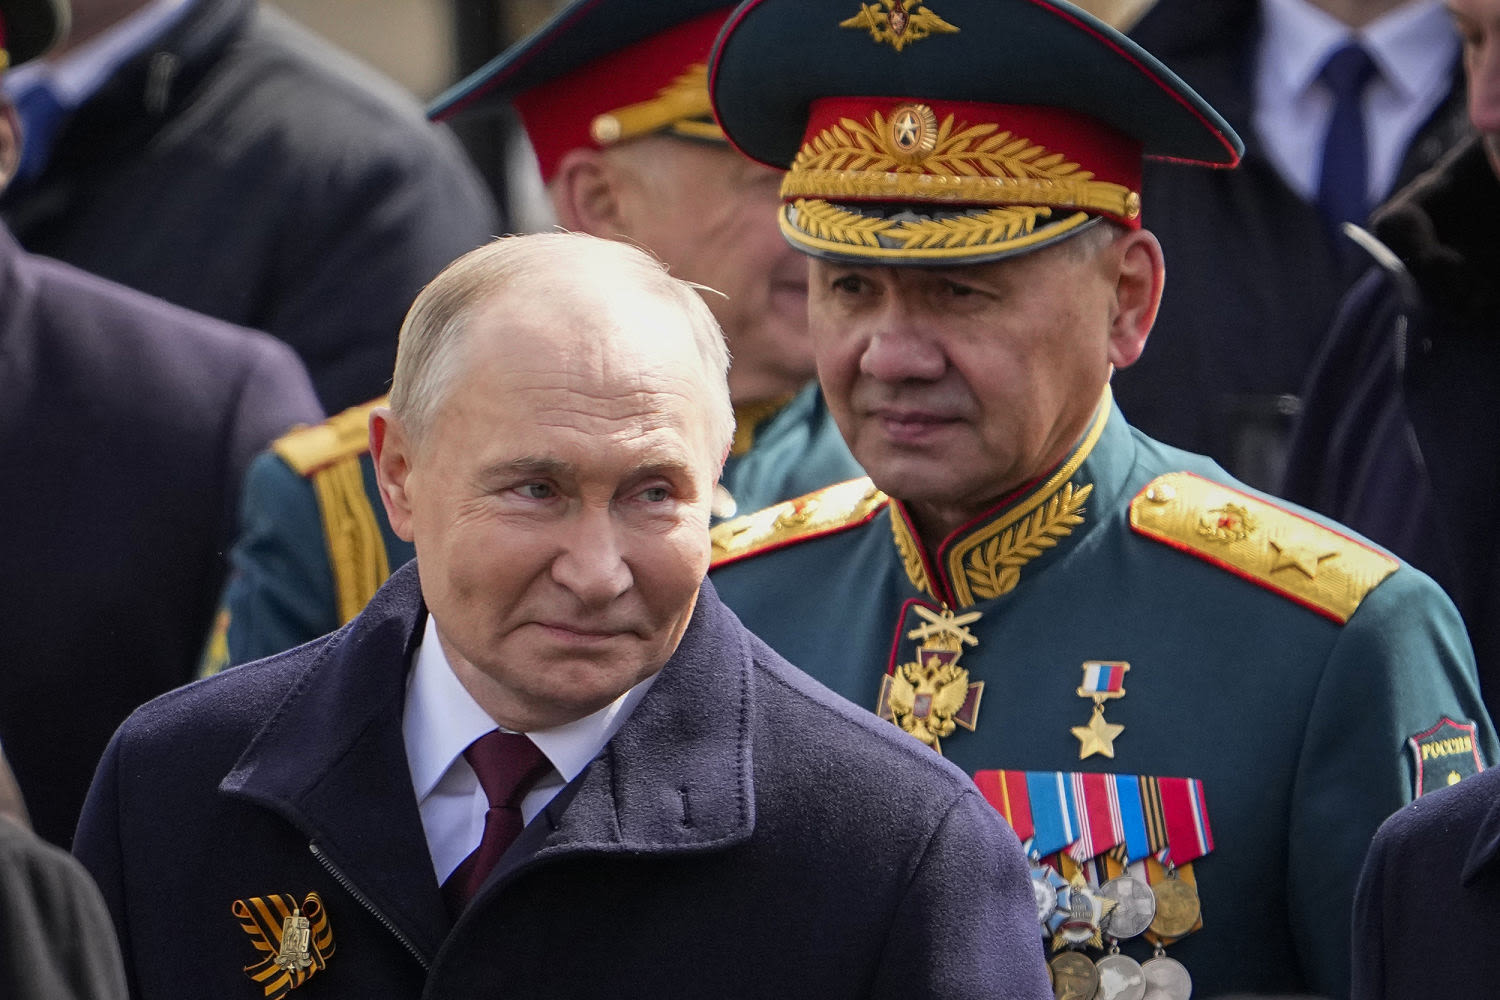 Man leading Russia’s war in Ukraine is out in a surprise shake-up hinting at Putin’s focus